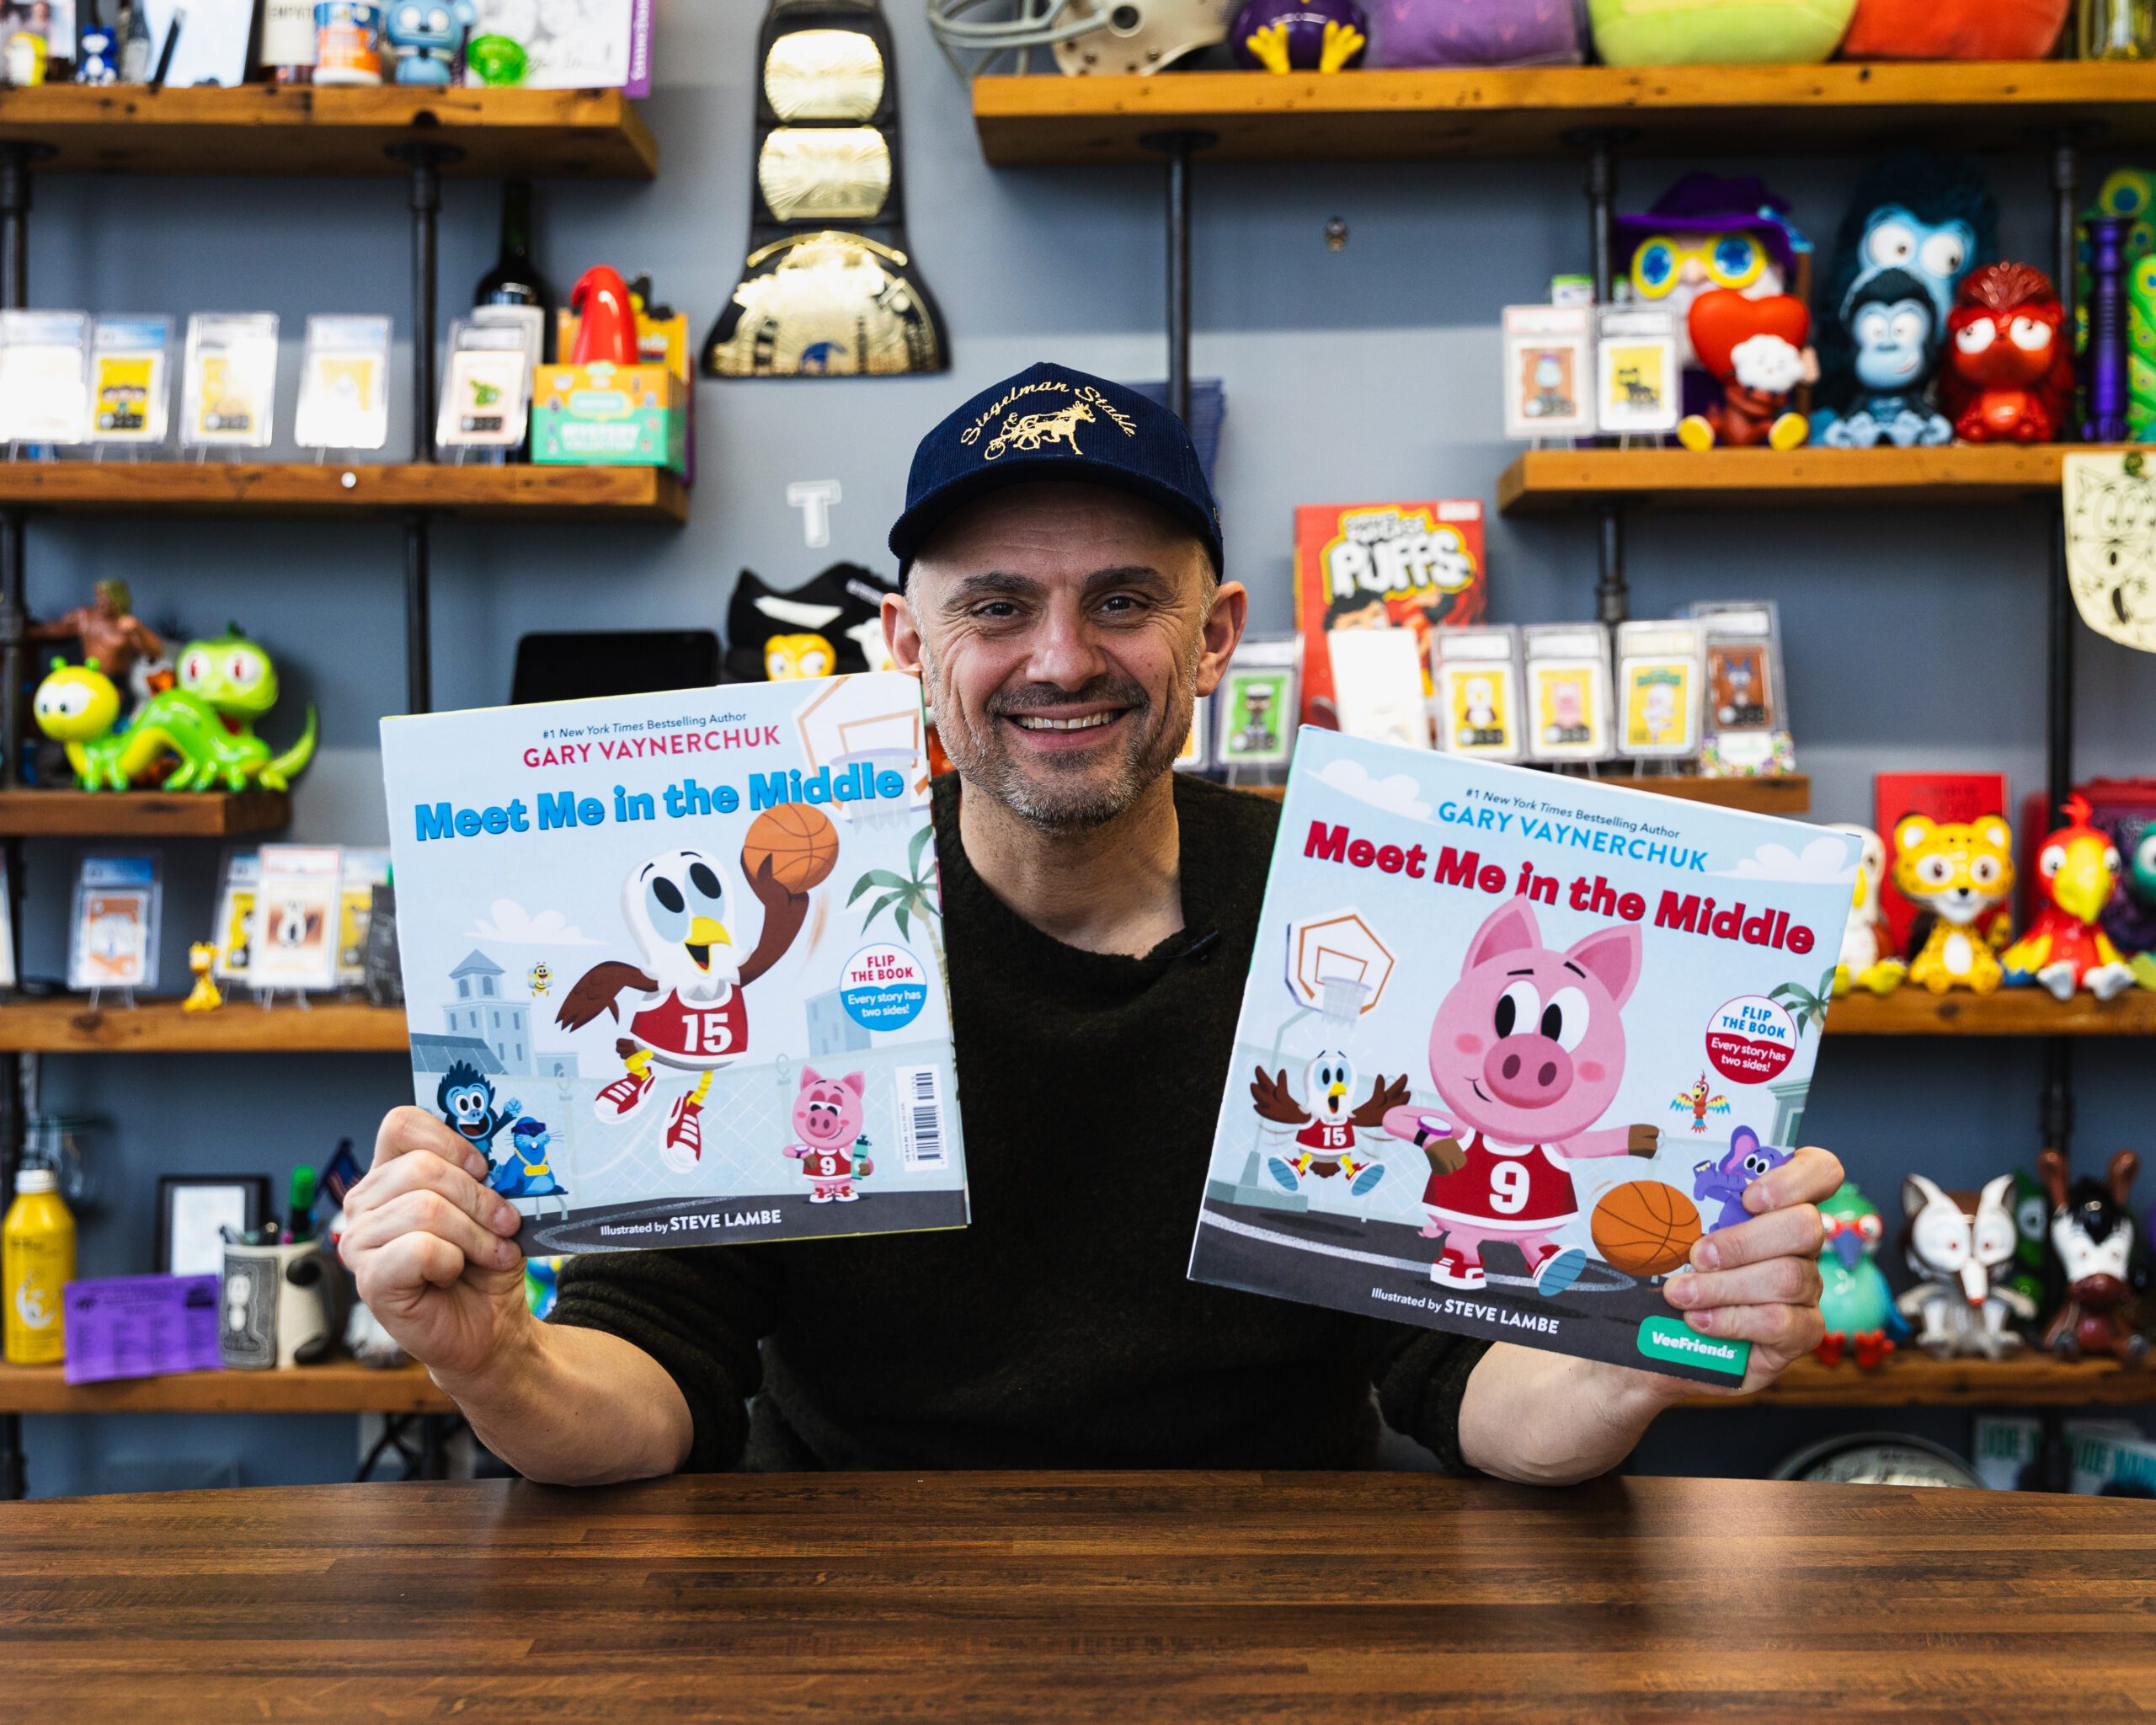 Gary Vaynerchuk Dives into Children’s Literature with ‘Meet Me in the Middle’